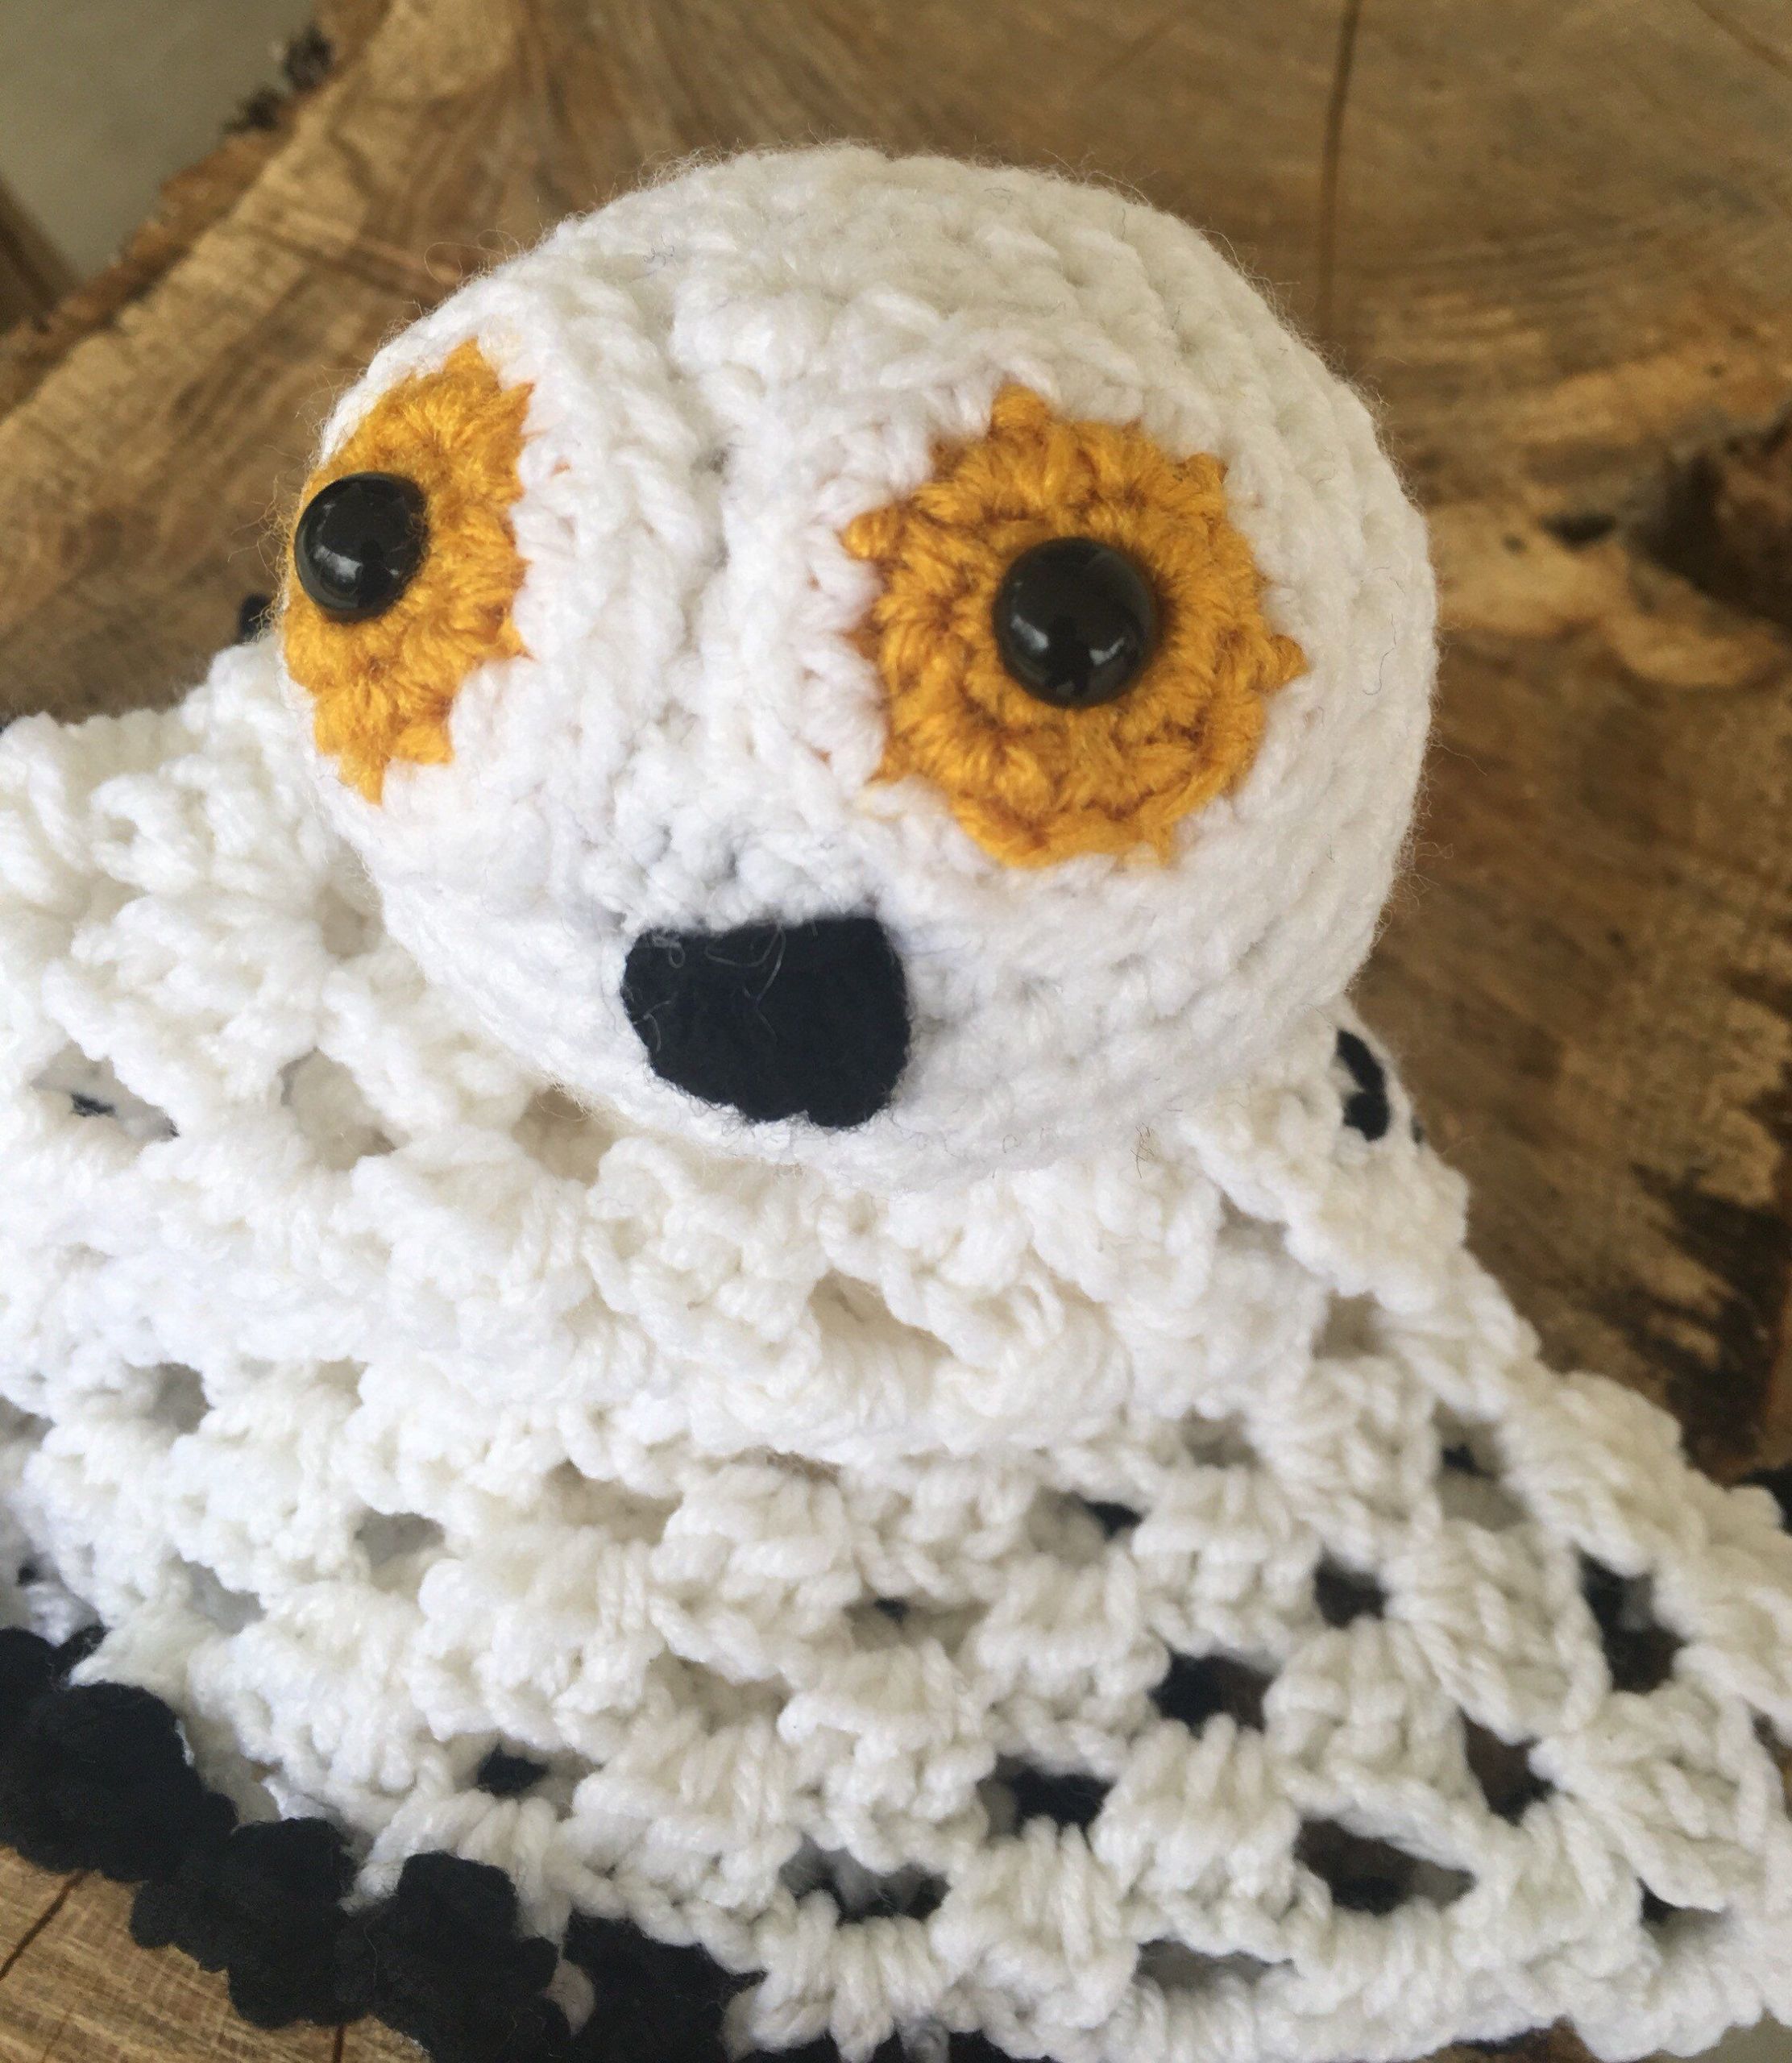 Harry Potter Baby Gift Ideas
 Snowy Owl lovey Hedwig inspired Harry Potter baby shower